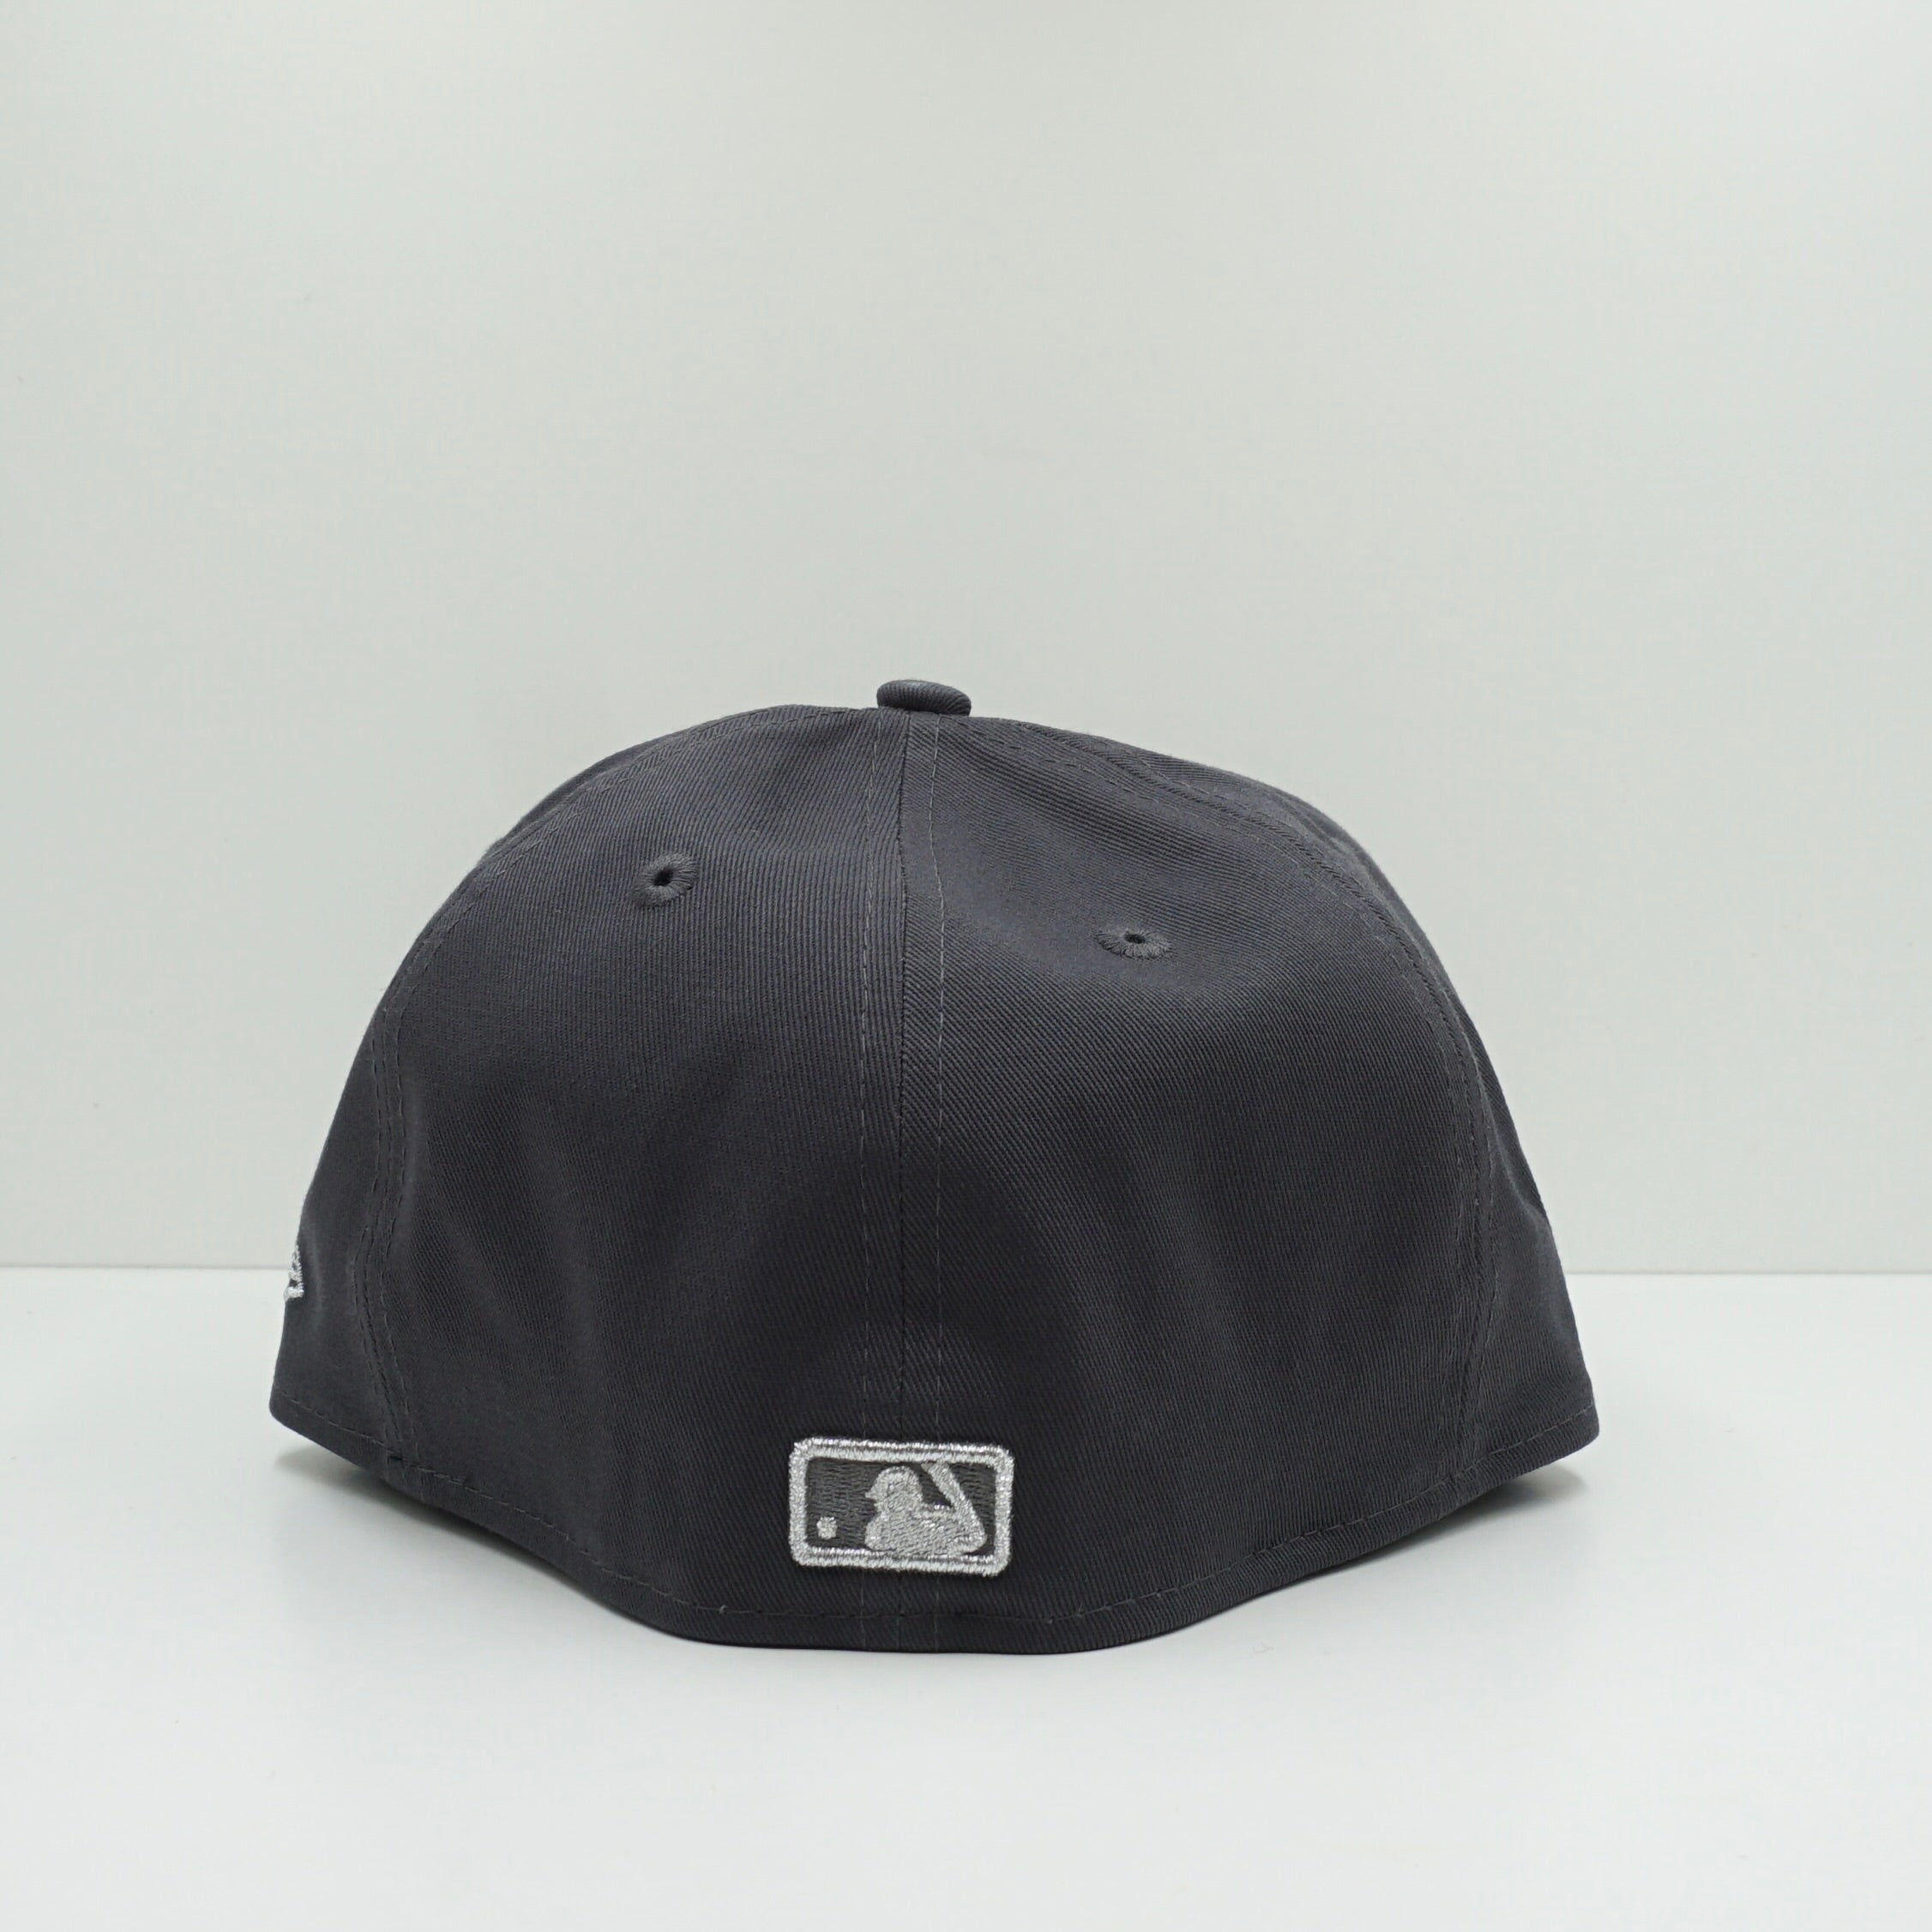 New Era New York Yankees Grey/Silver Fitted Cap